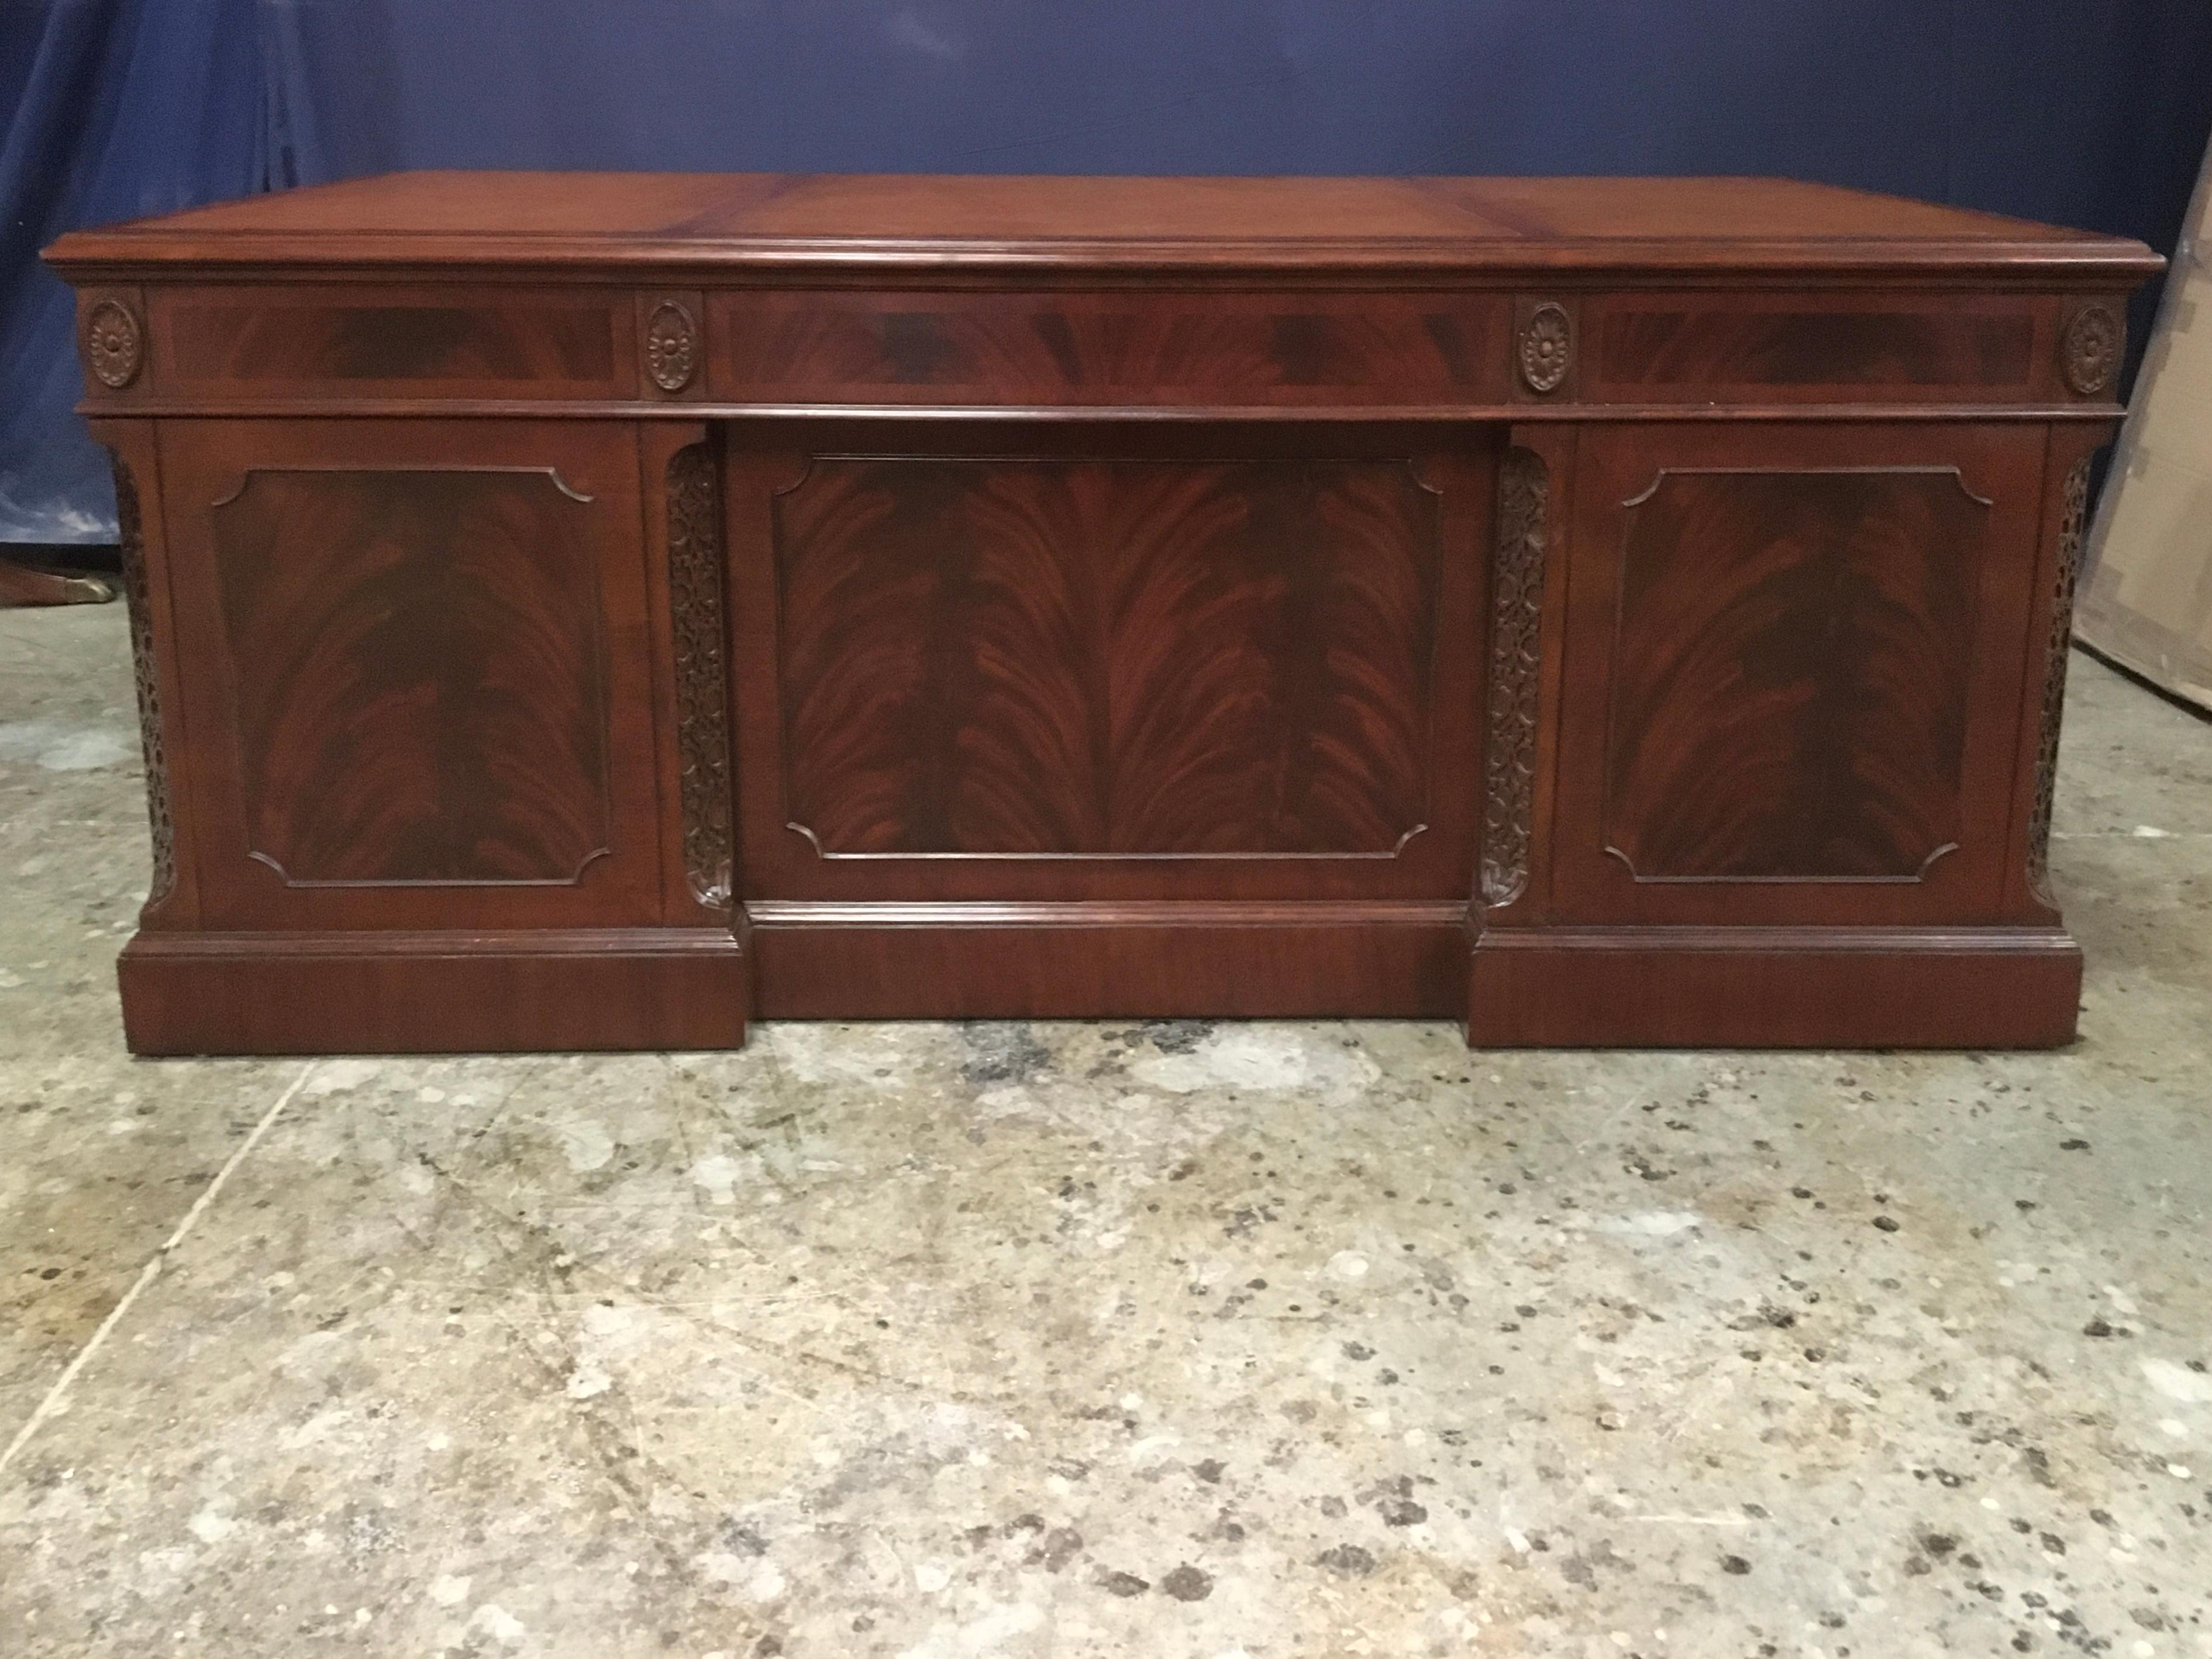 This is a new traditional mahogany executive desk. Its design was inspired by large desks from the 1800s. It is the regular size version of our classic (84”) LH-3084. It features a top of brown leather with gold tooling. Its front and side panels